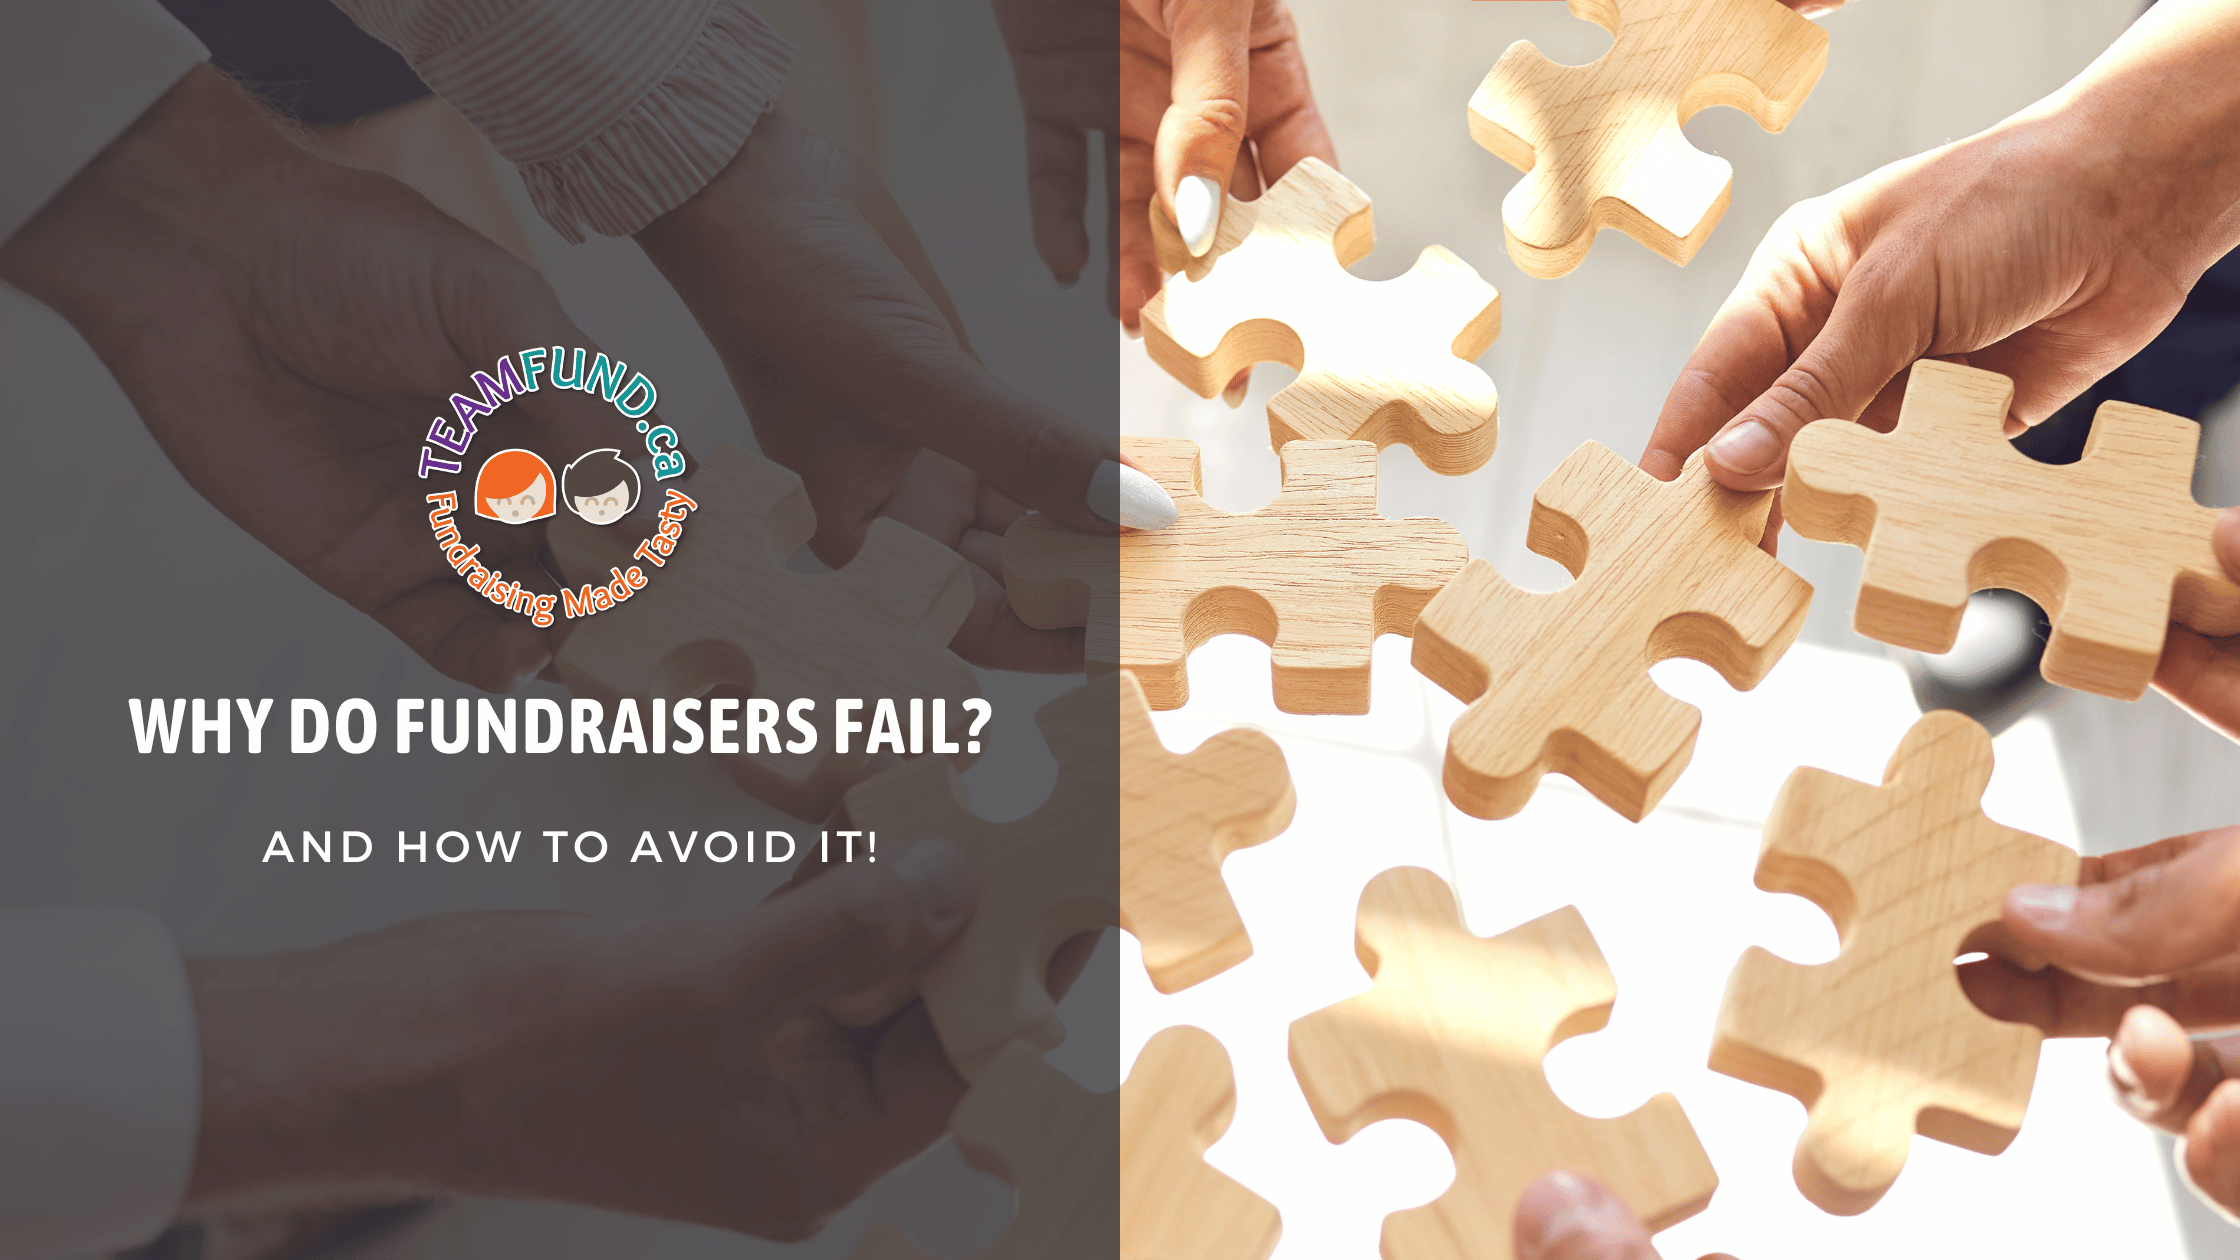 Why do fundraisers fail? (and how to avoid it)